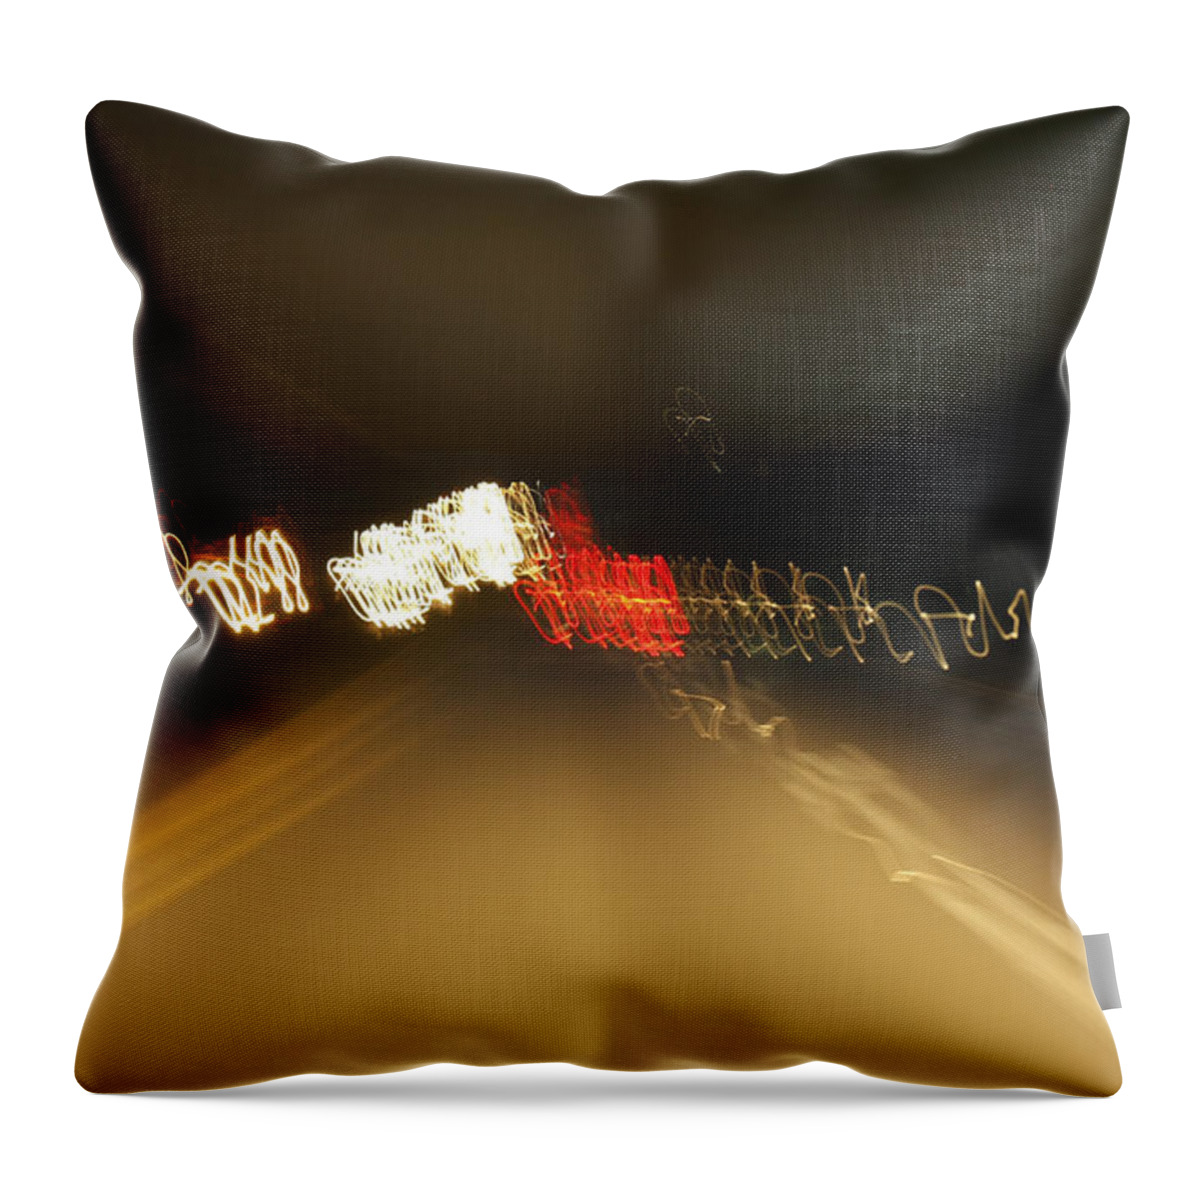 Night Light Play Throw Pillow featuring the photograph Pwl 007 by David Yocum